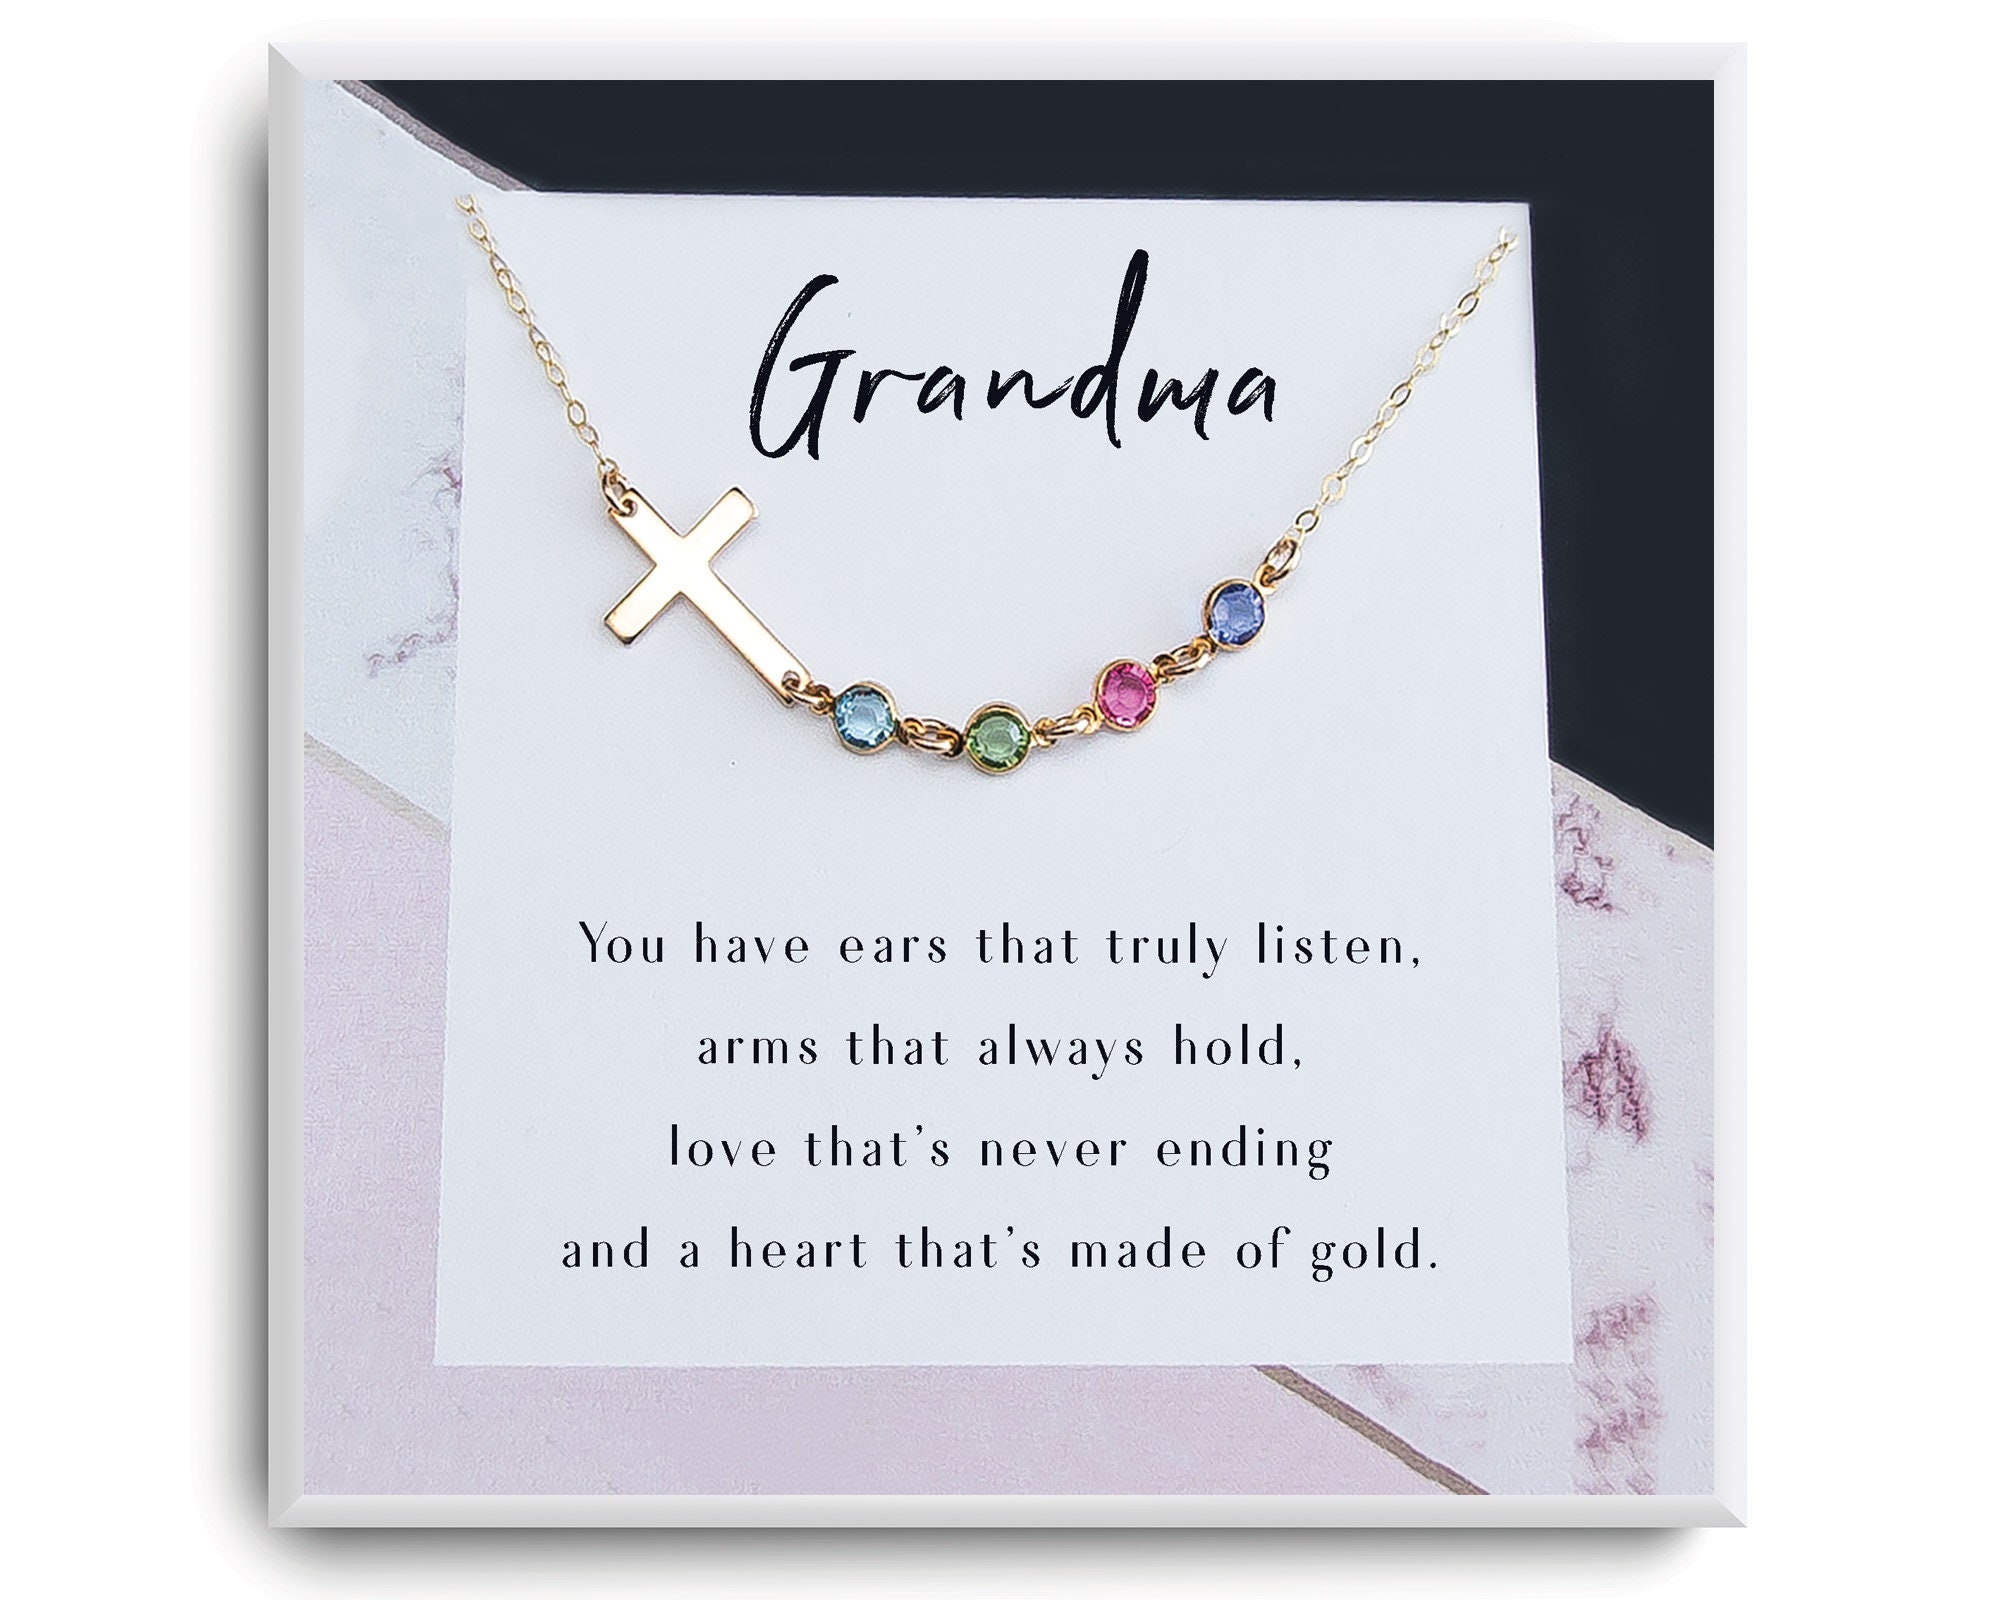 Grandma Necklace 14K Gold Filled Silver Nana Gifts pic